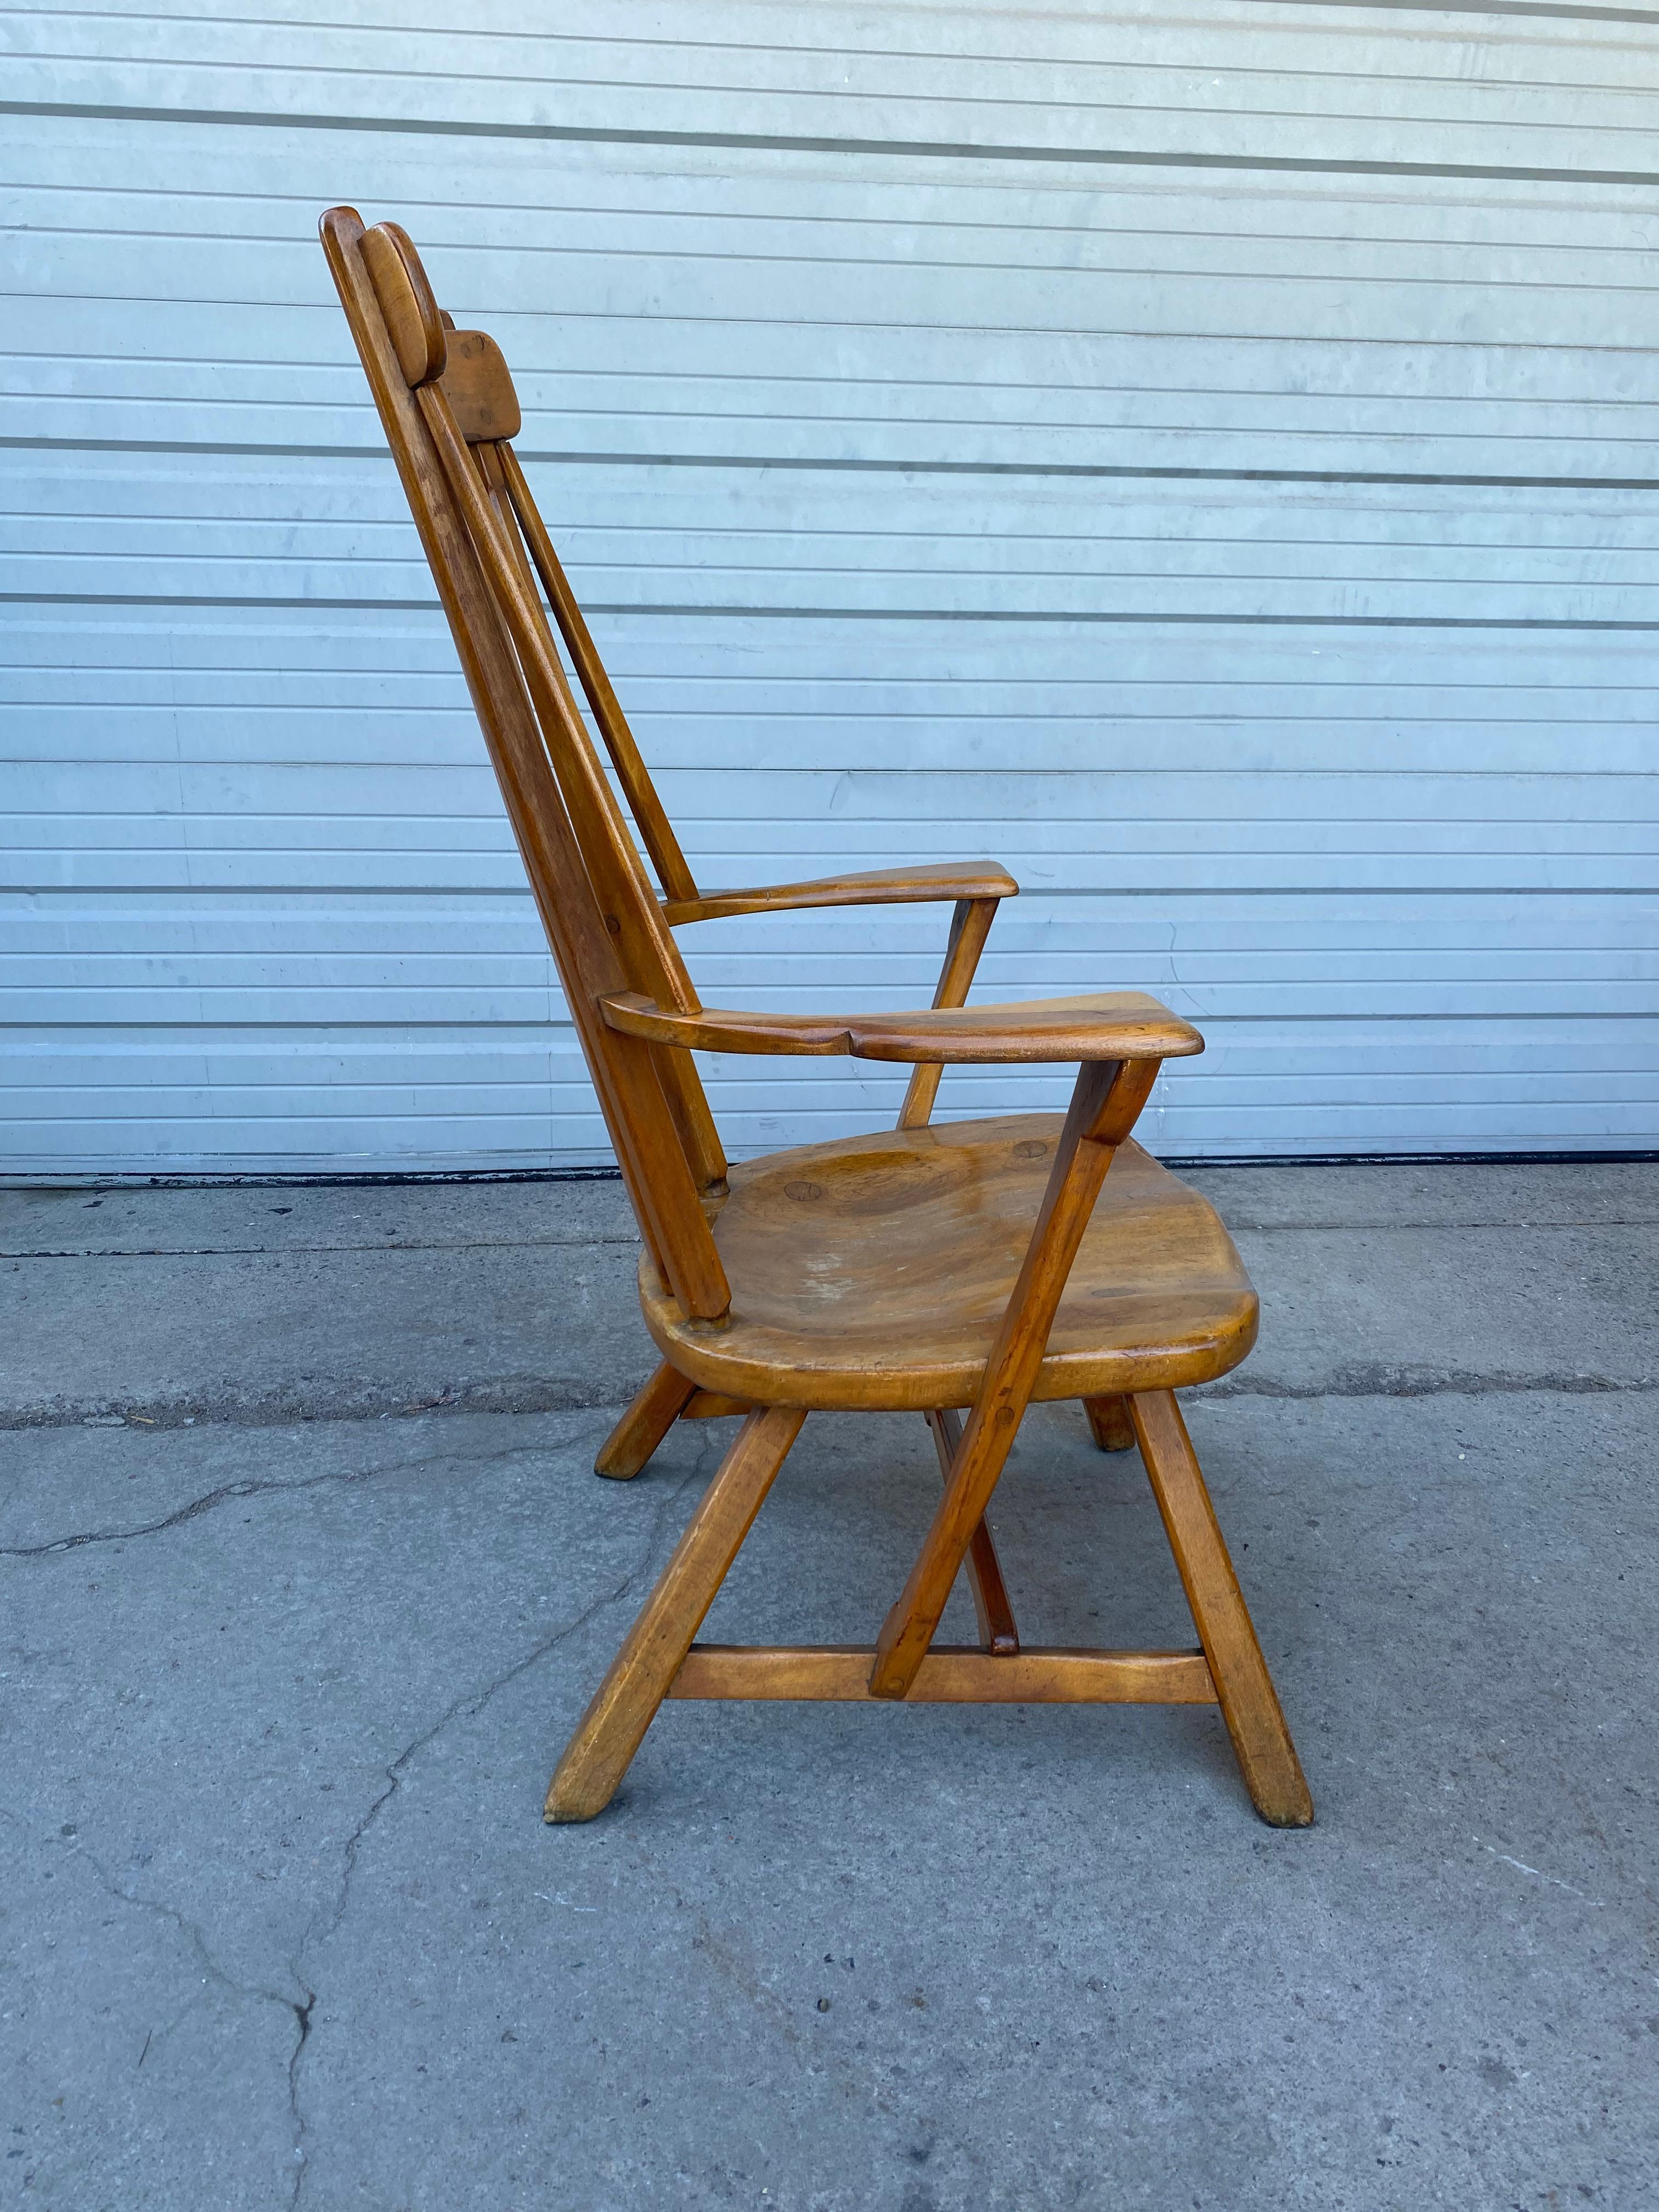 Classic Windsor armchair by the Sikes Chair Company of Buffalo. This was created by designer by Herman de Vries. Retains original patina. Finish, extremely comfortable... superior quality and construction. Age appropriate wear. Hand delivery avail